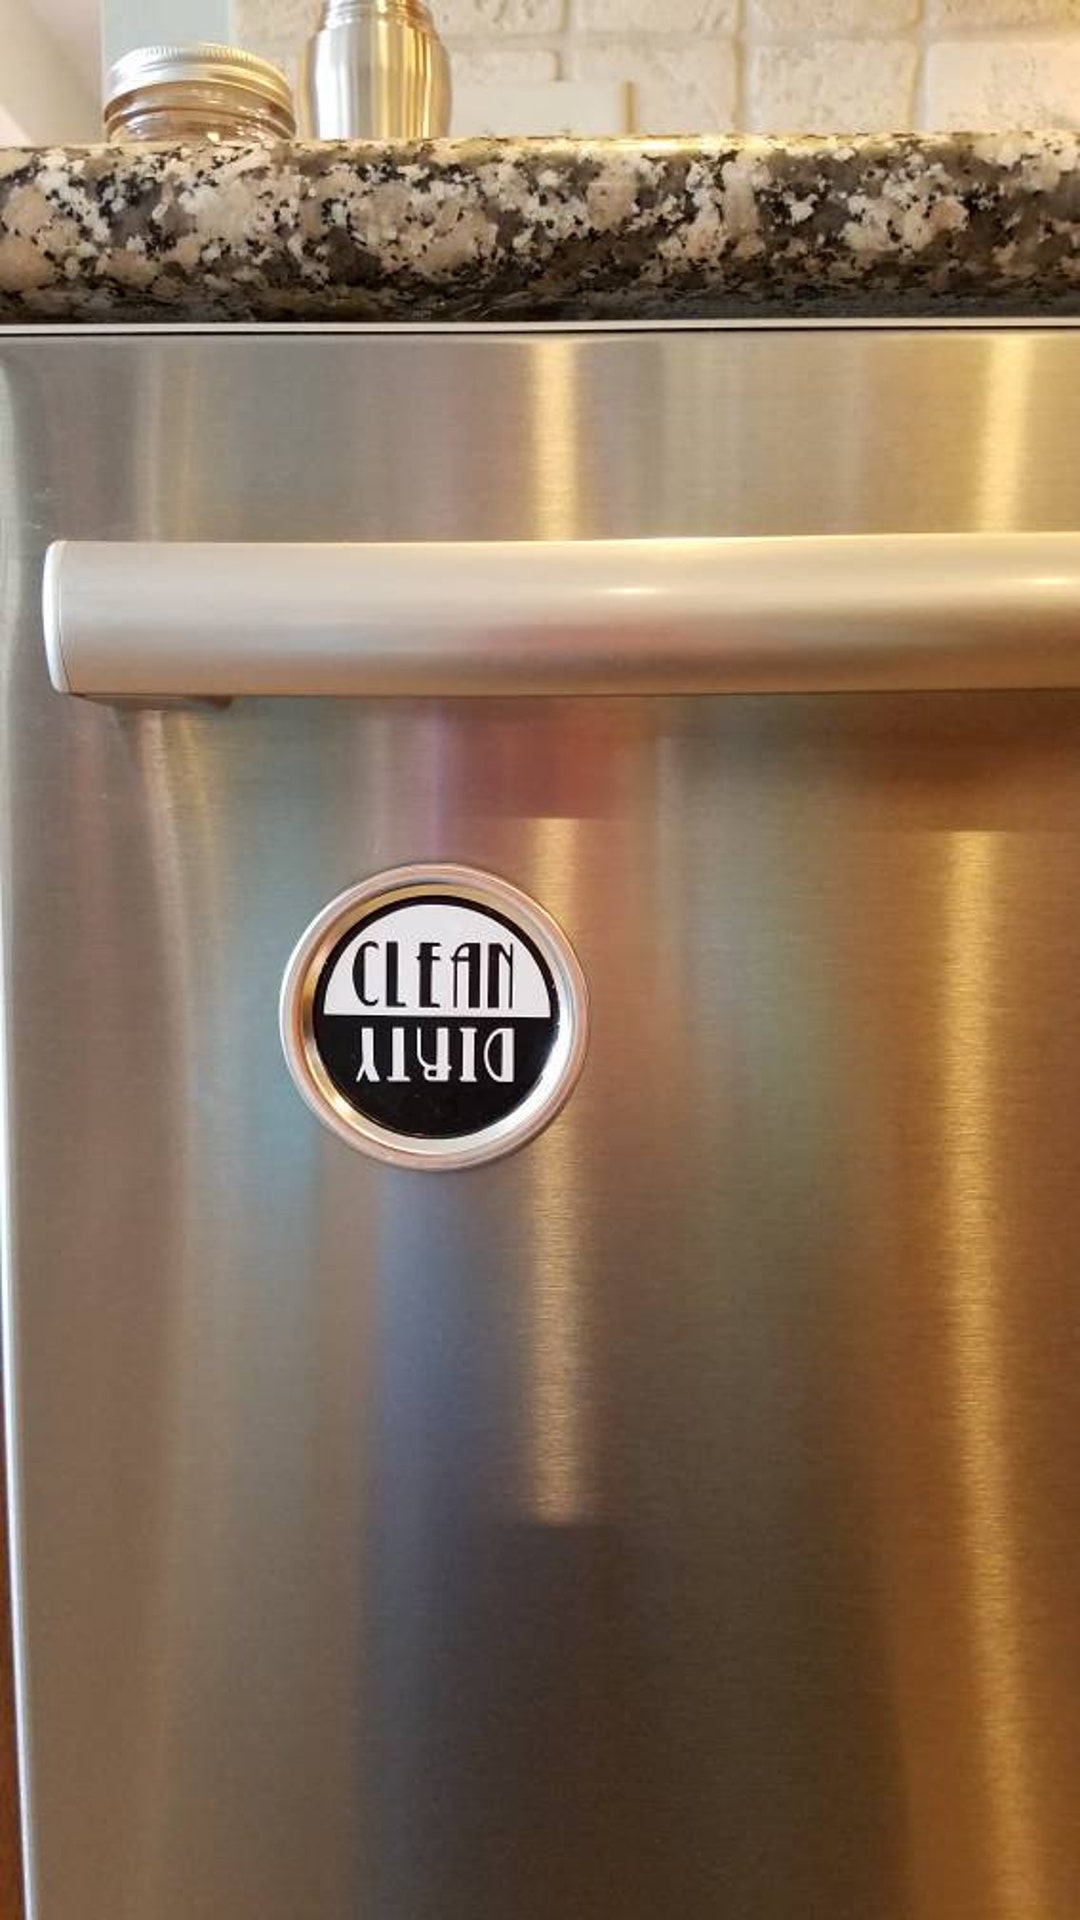 Clean Dirty Dishwasher Magnet | Reversible Sign Looks Great on Stainless Steel | Clean Farmhouse Design Decor | Strong Magnet | Engraved on Premium